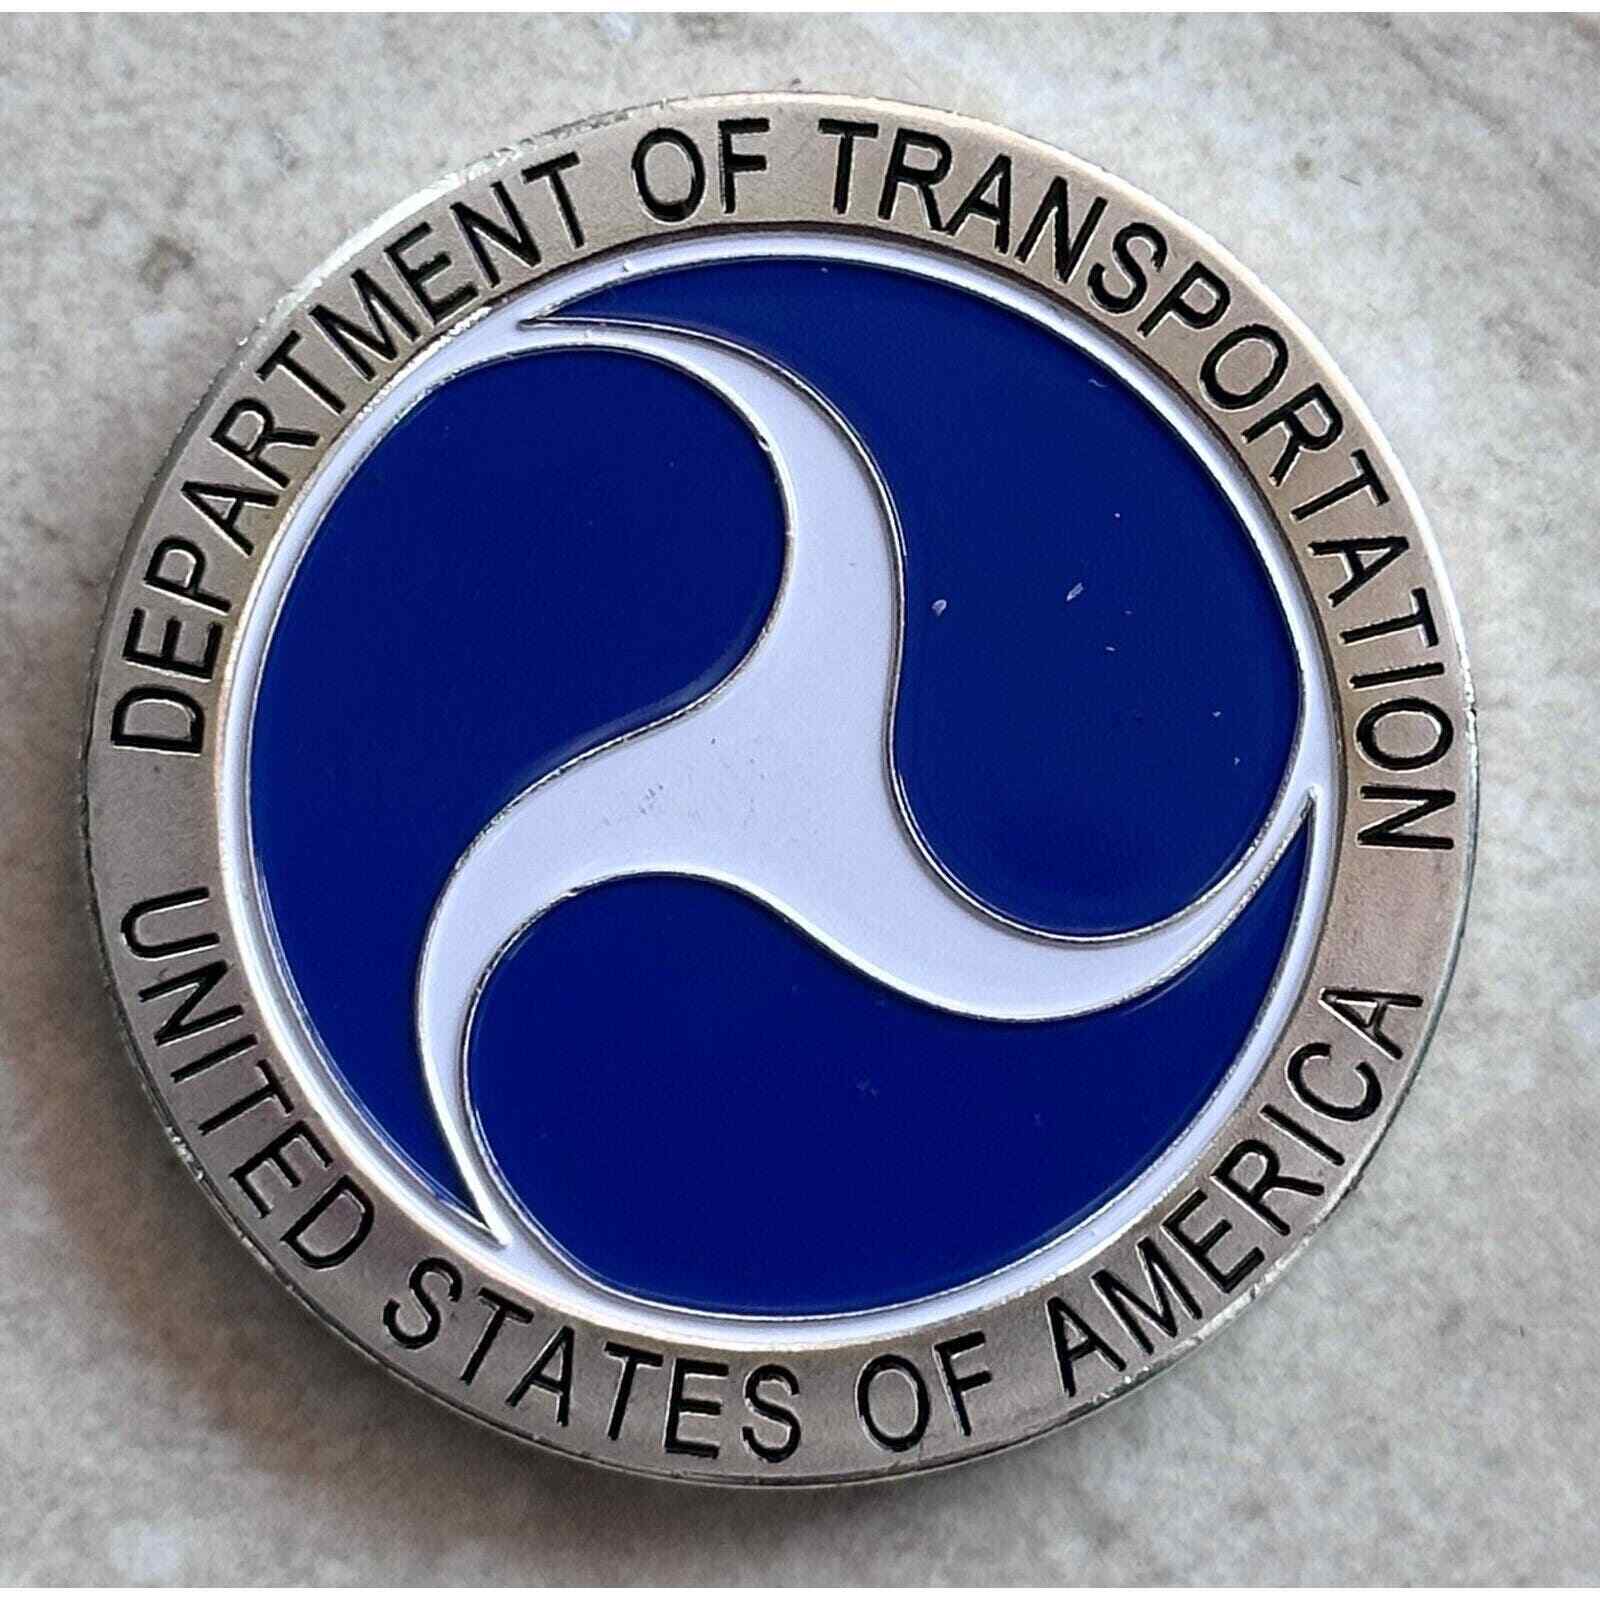 U S Department of the Transportation Challenge Coin